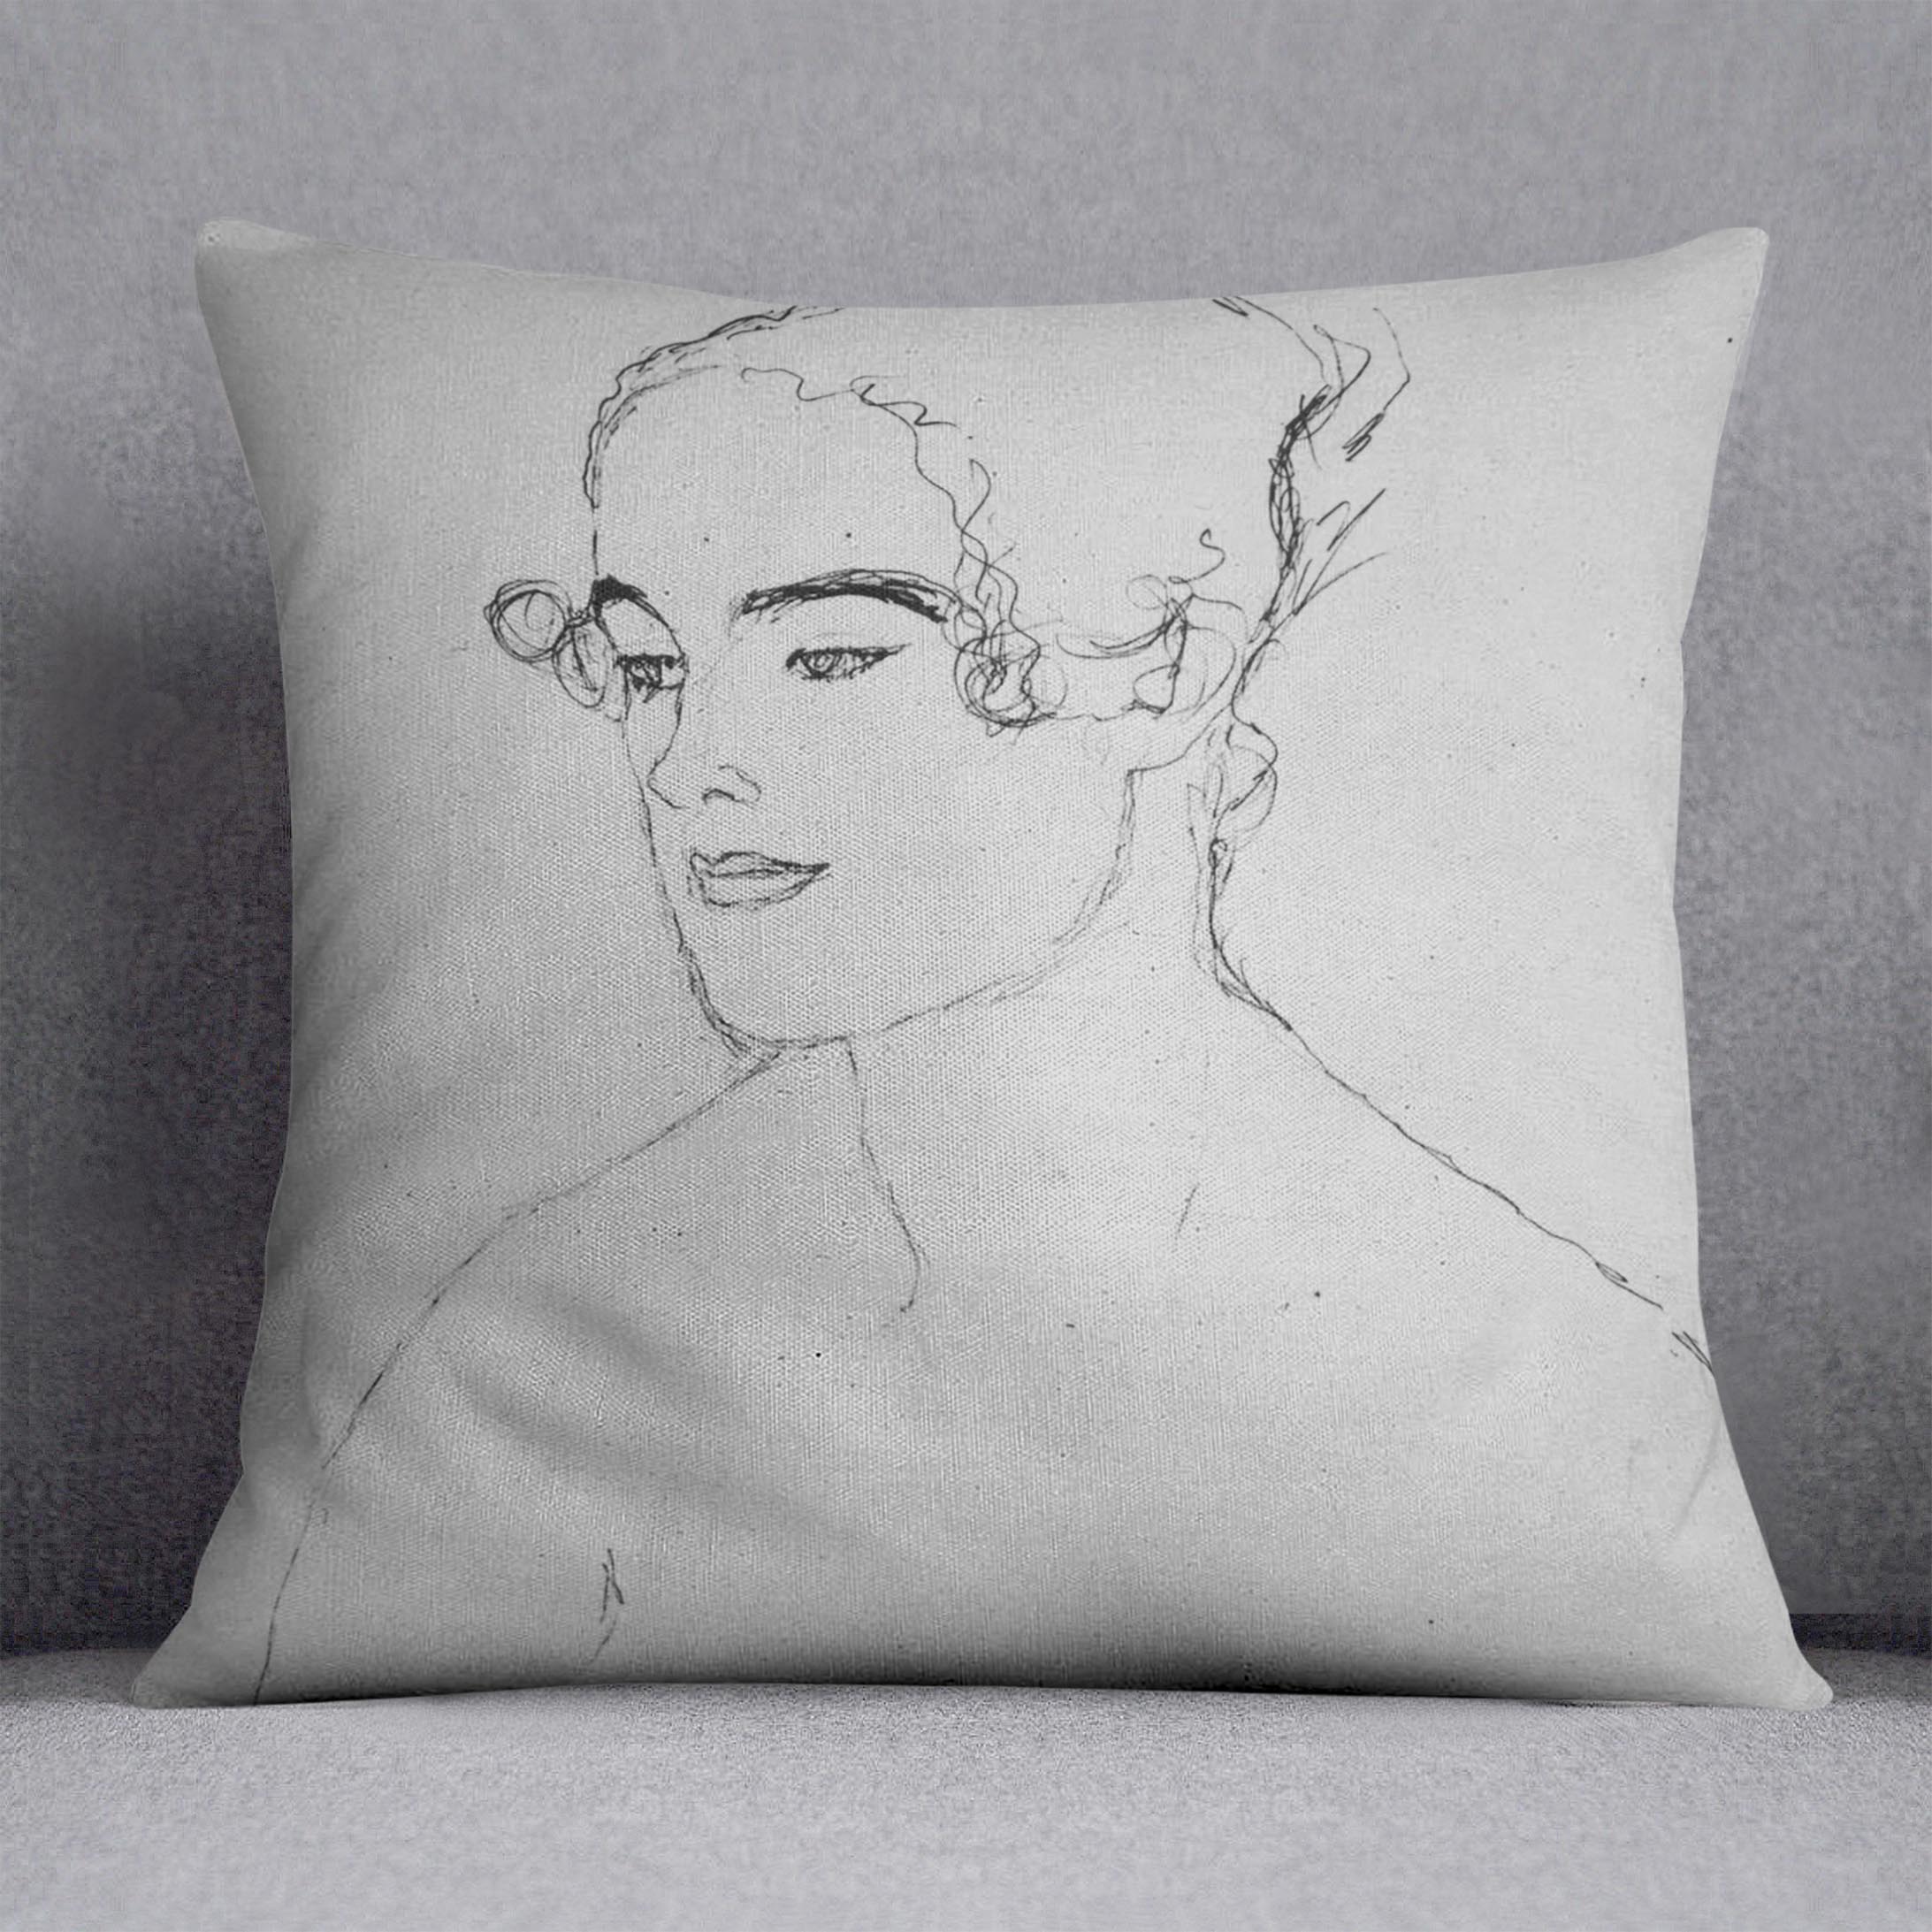 Image of a girl by Klimt Cushion